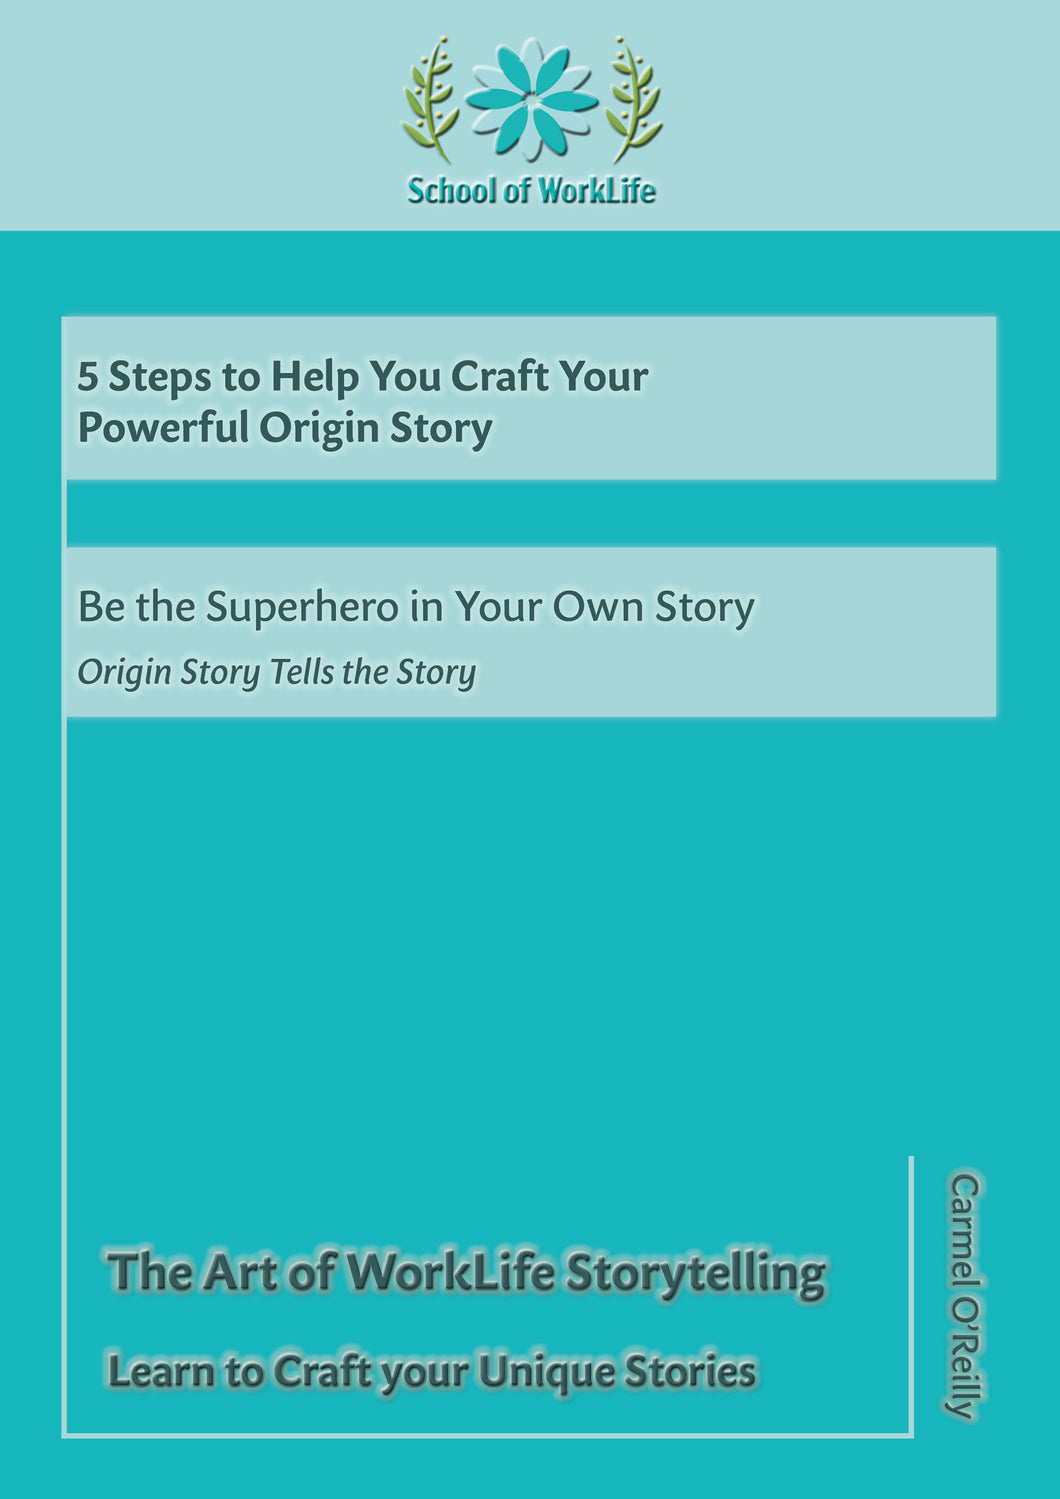 5 Steps to Help You Craft Your Powerful Origin Story